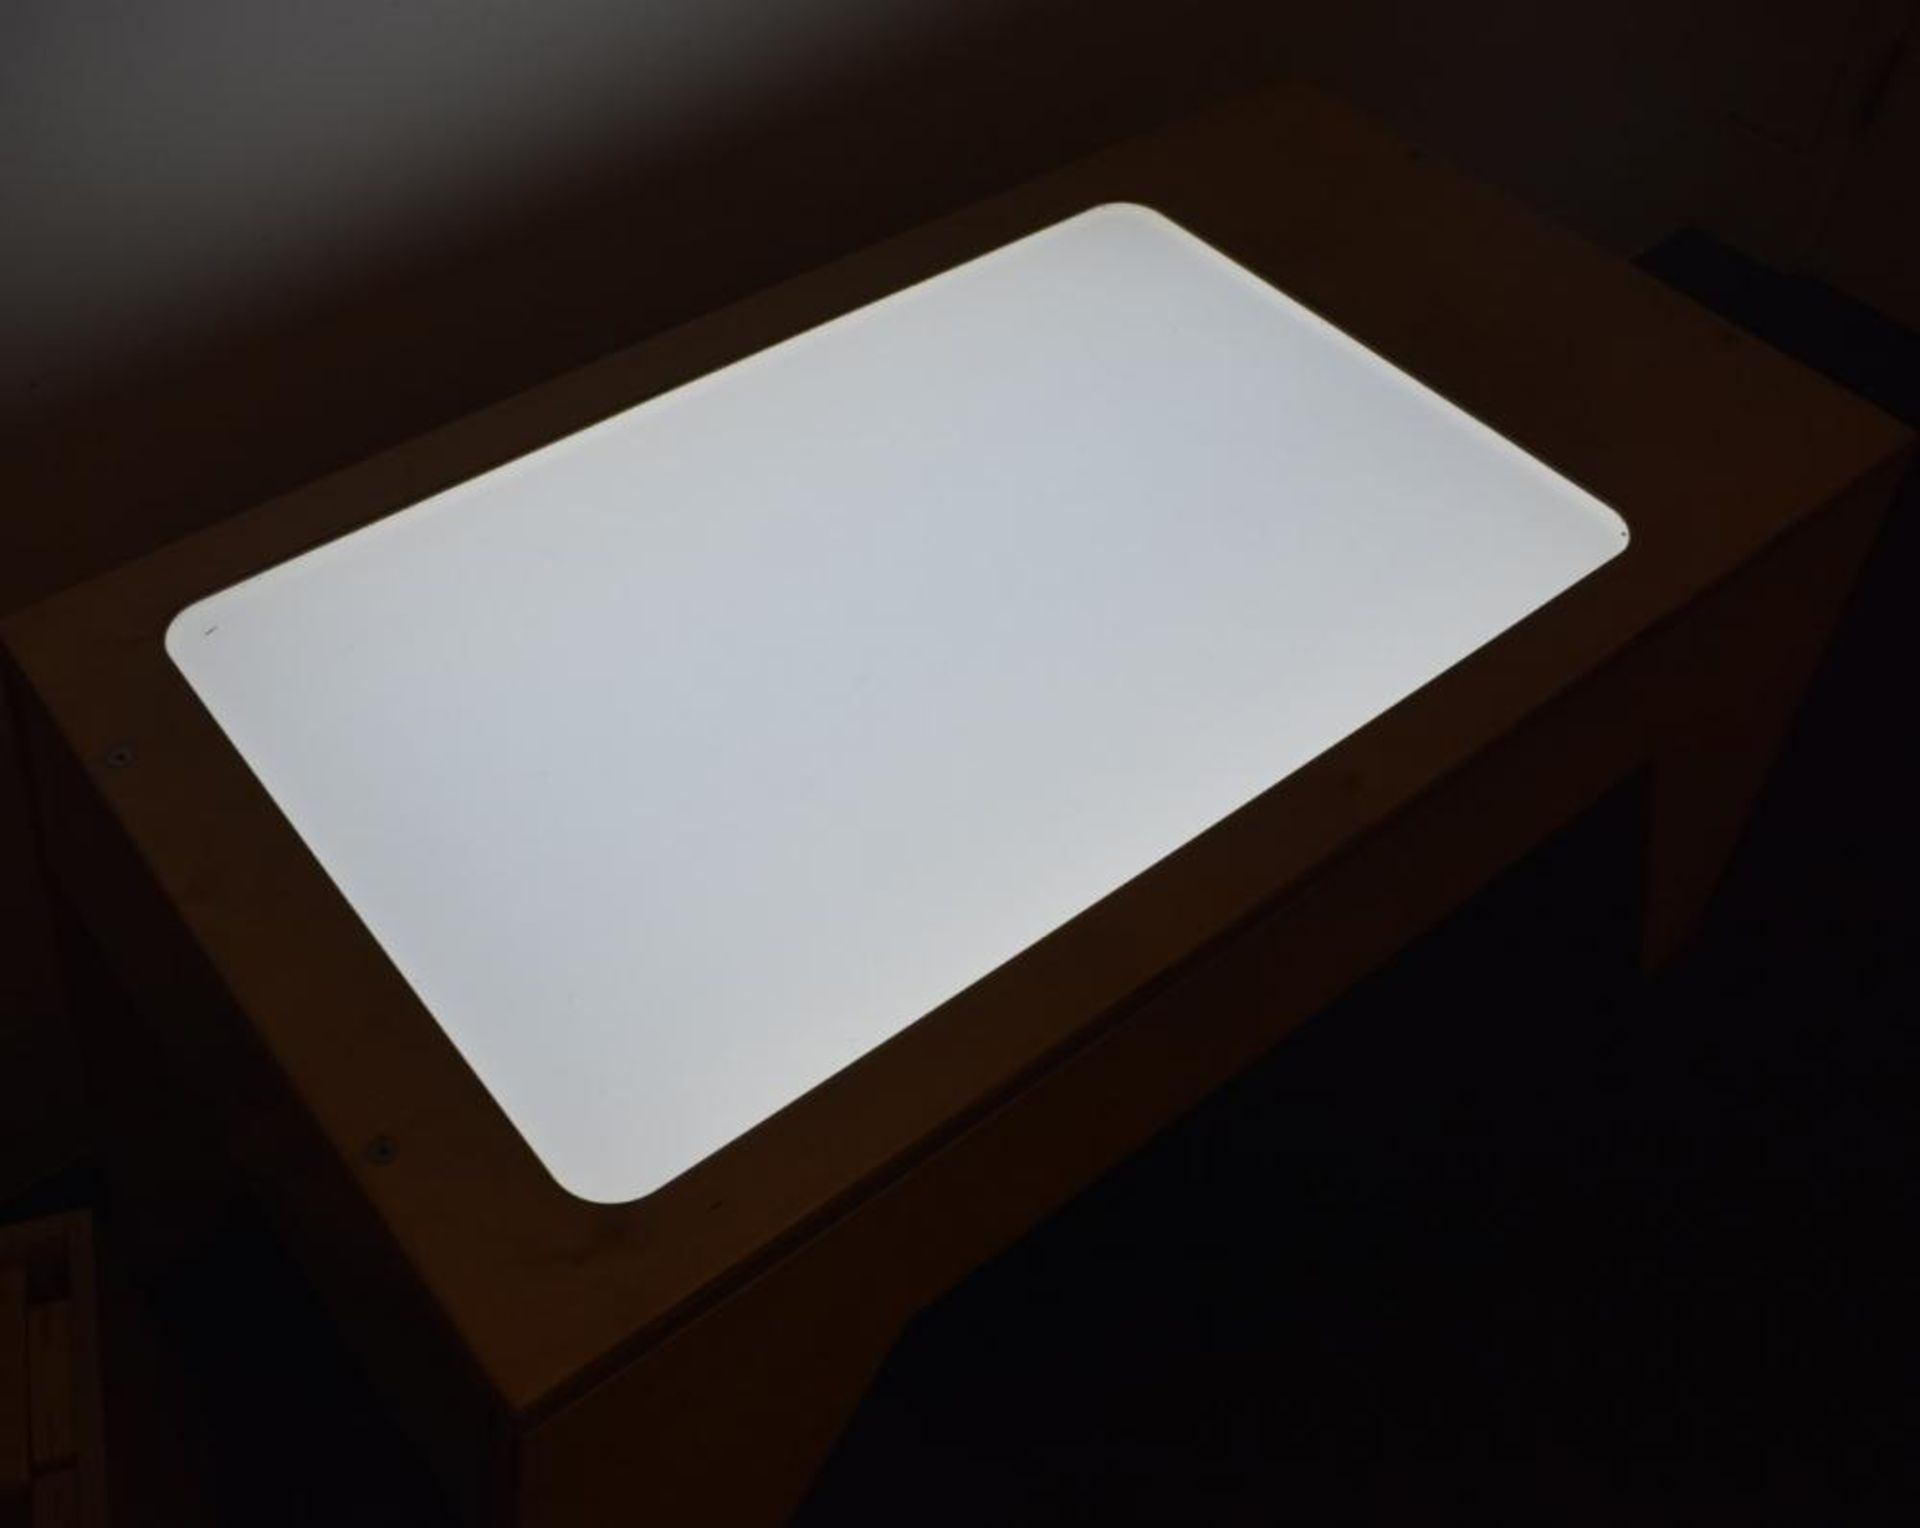 1 x Childrens Light Box Table - CL489 - Location: Putney, London, SW15 - Image 3 of 3